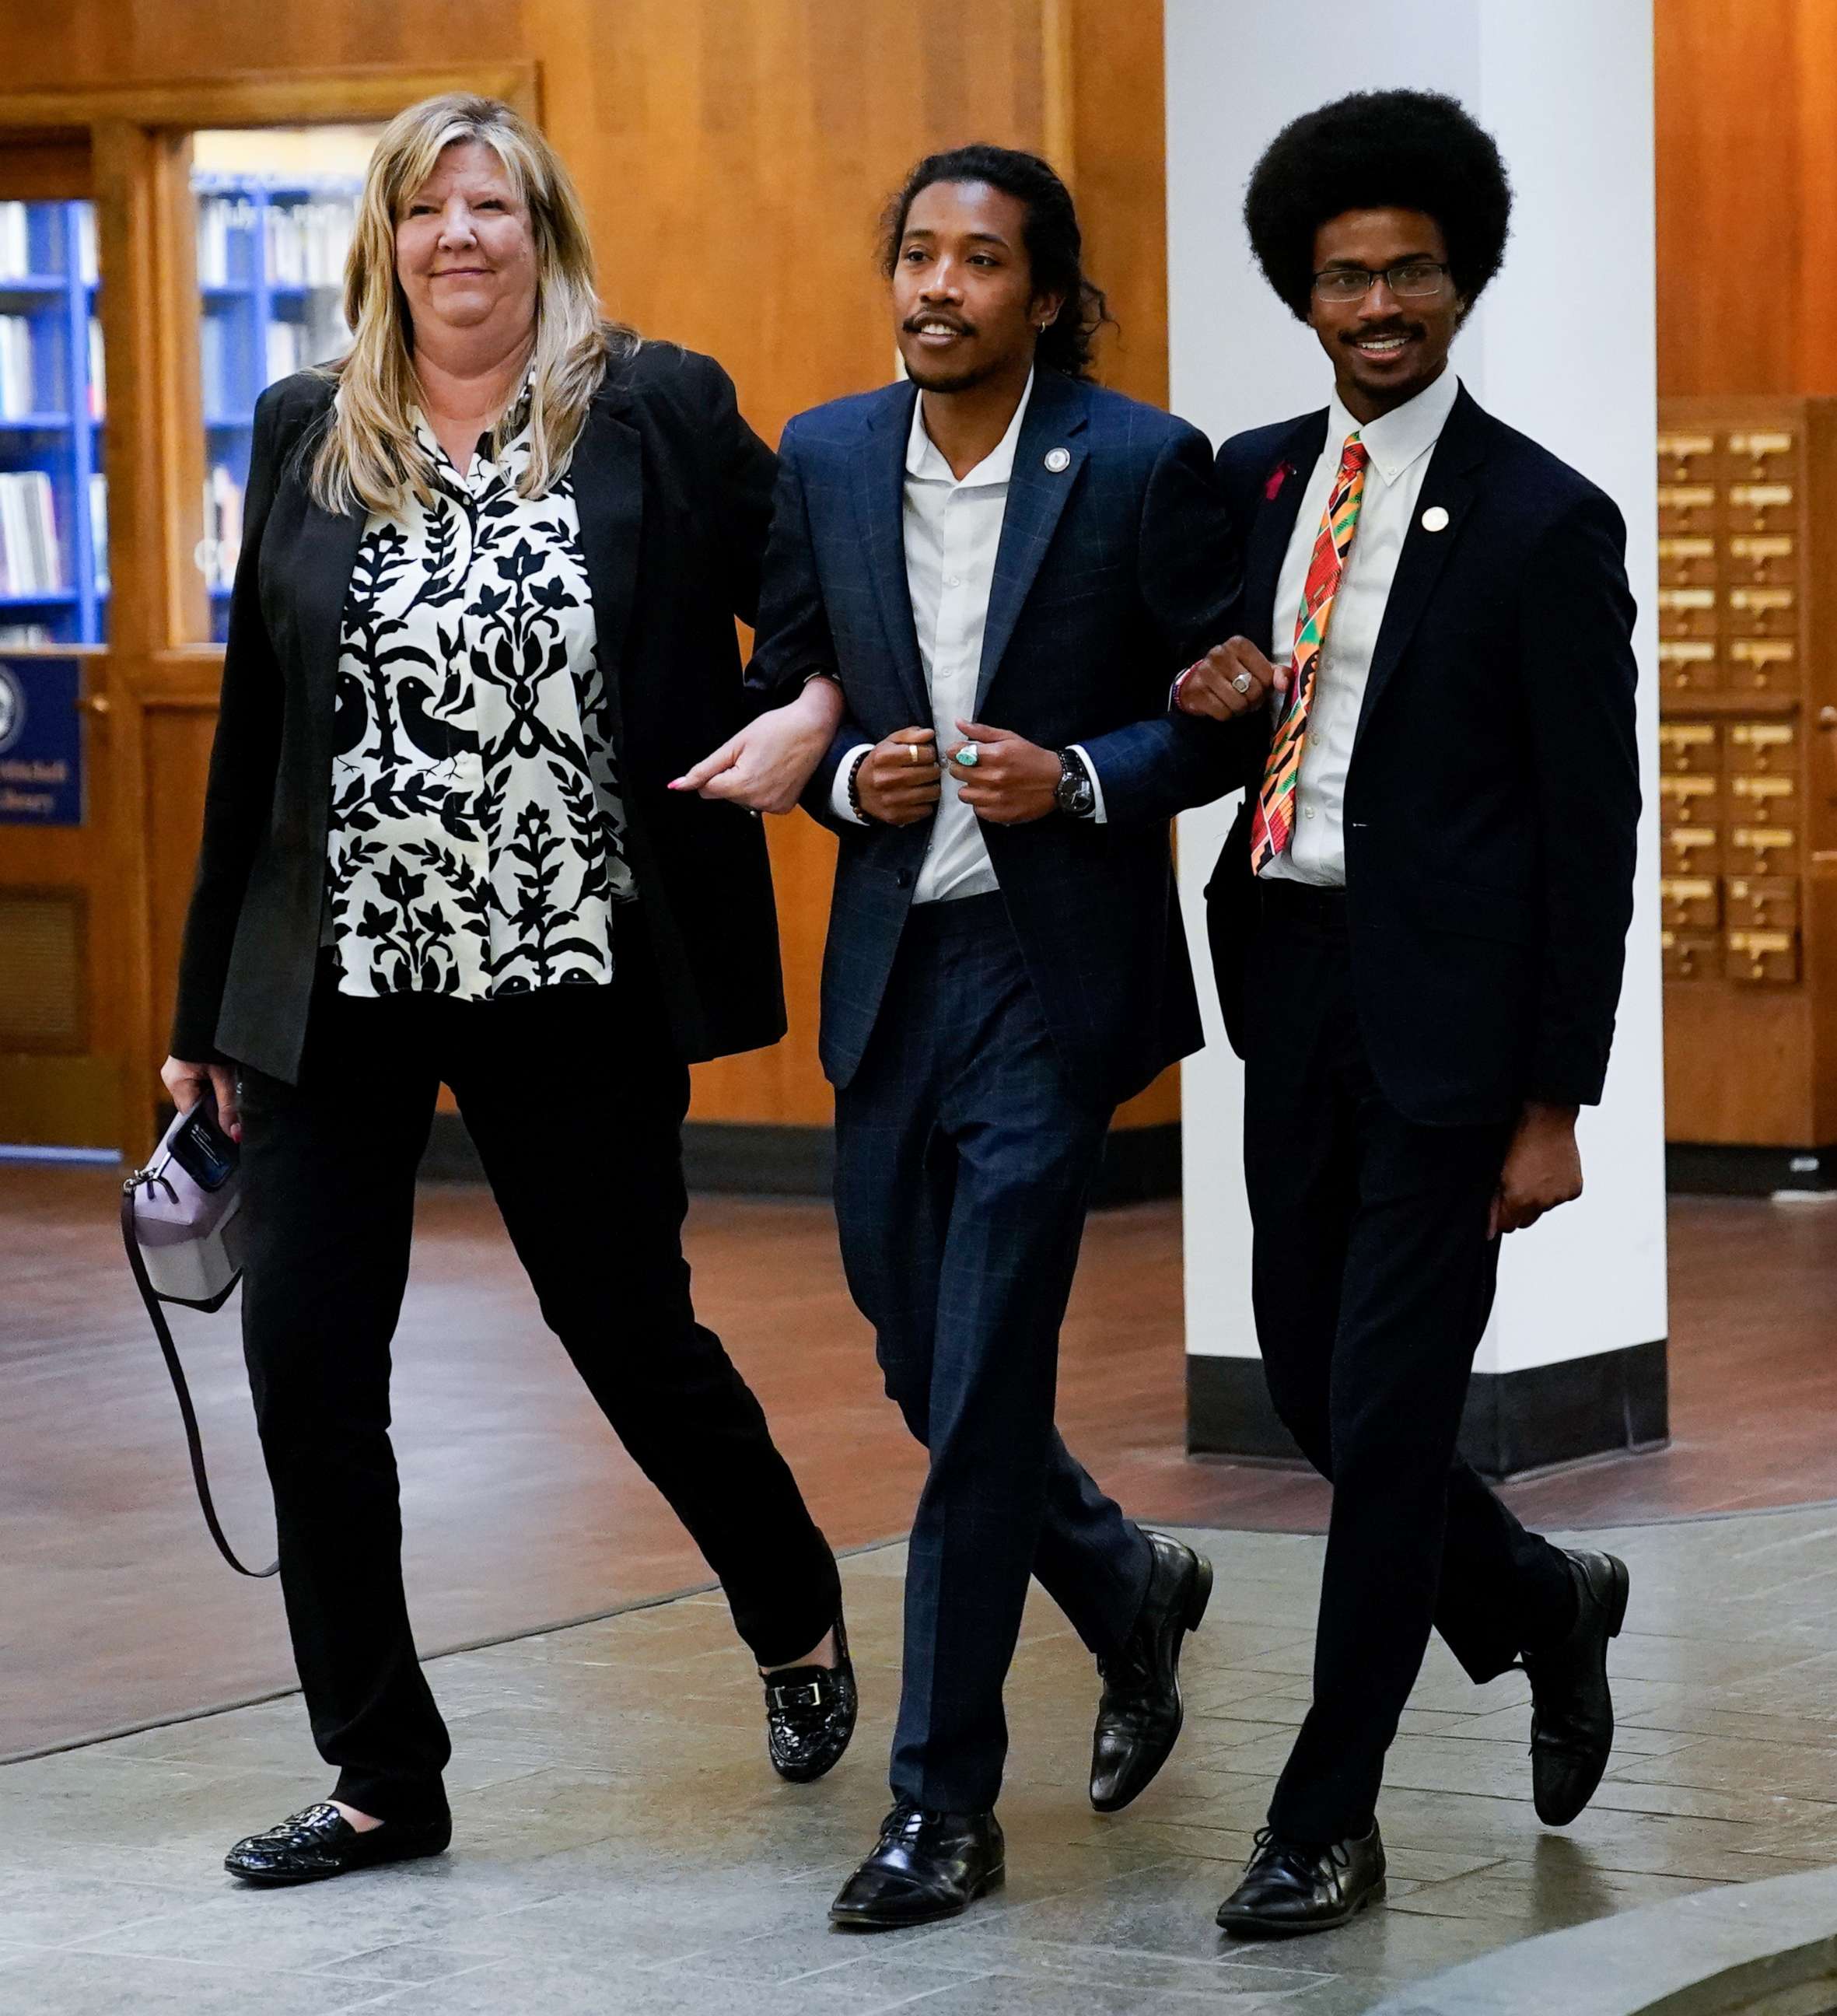 PHOTO: Gloria Johnson, Justin Jones and Justin Pearson arrive at Fisk University in Nashville, Tenn., on April 7, 2023, where they are meeting with Vice President Kamala Harris.